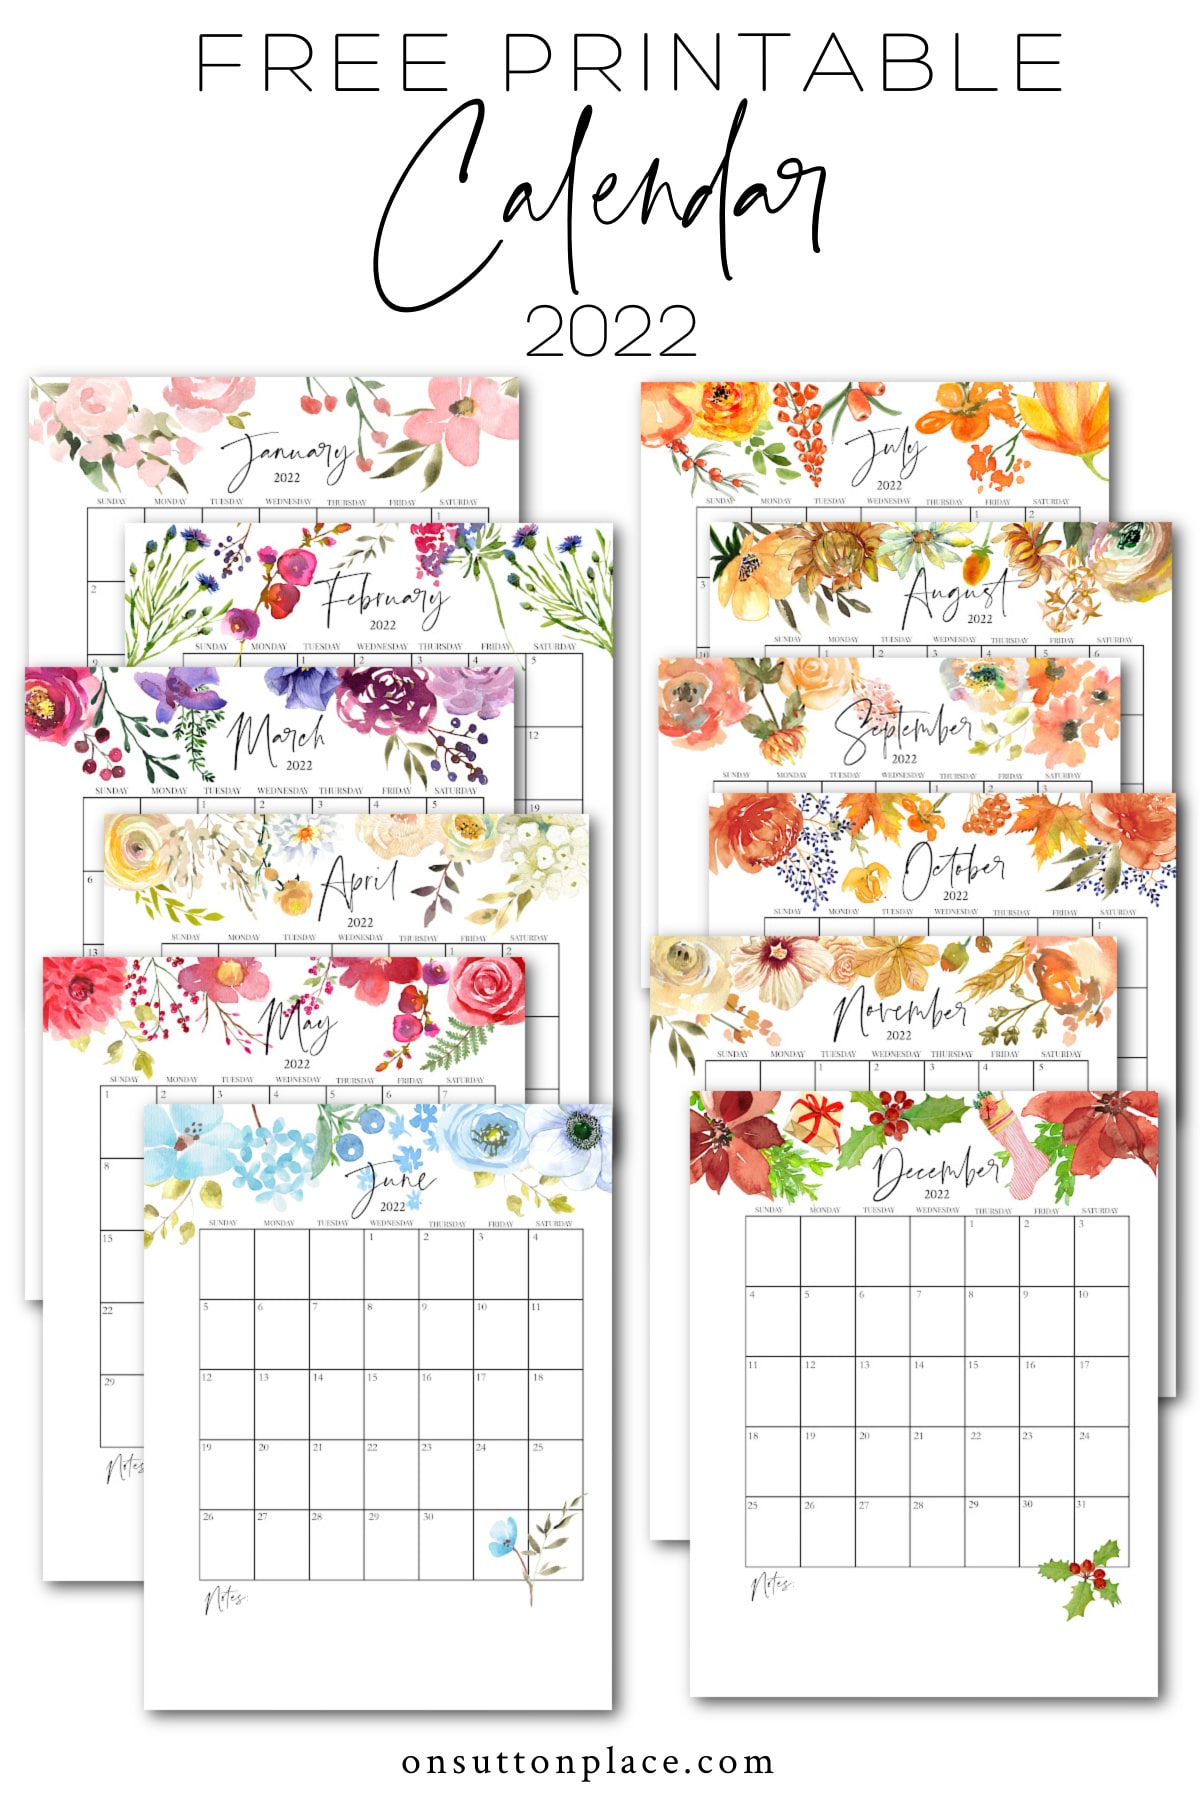 Free Printable Coloring Calendar 2022 50+ Of The Best 2022 Free Printable Calendars - The Turquoise Home